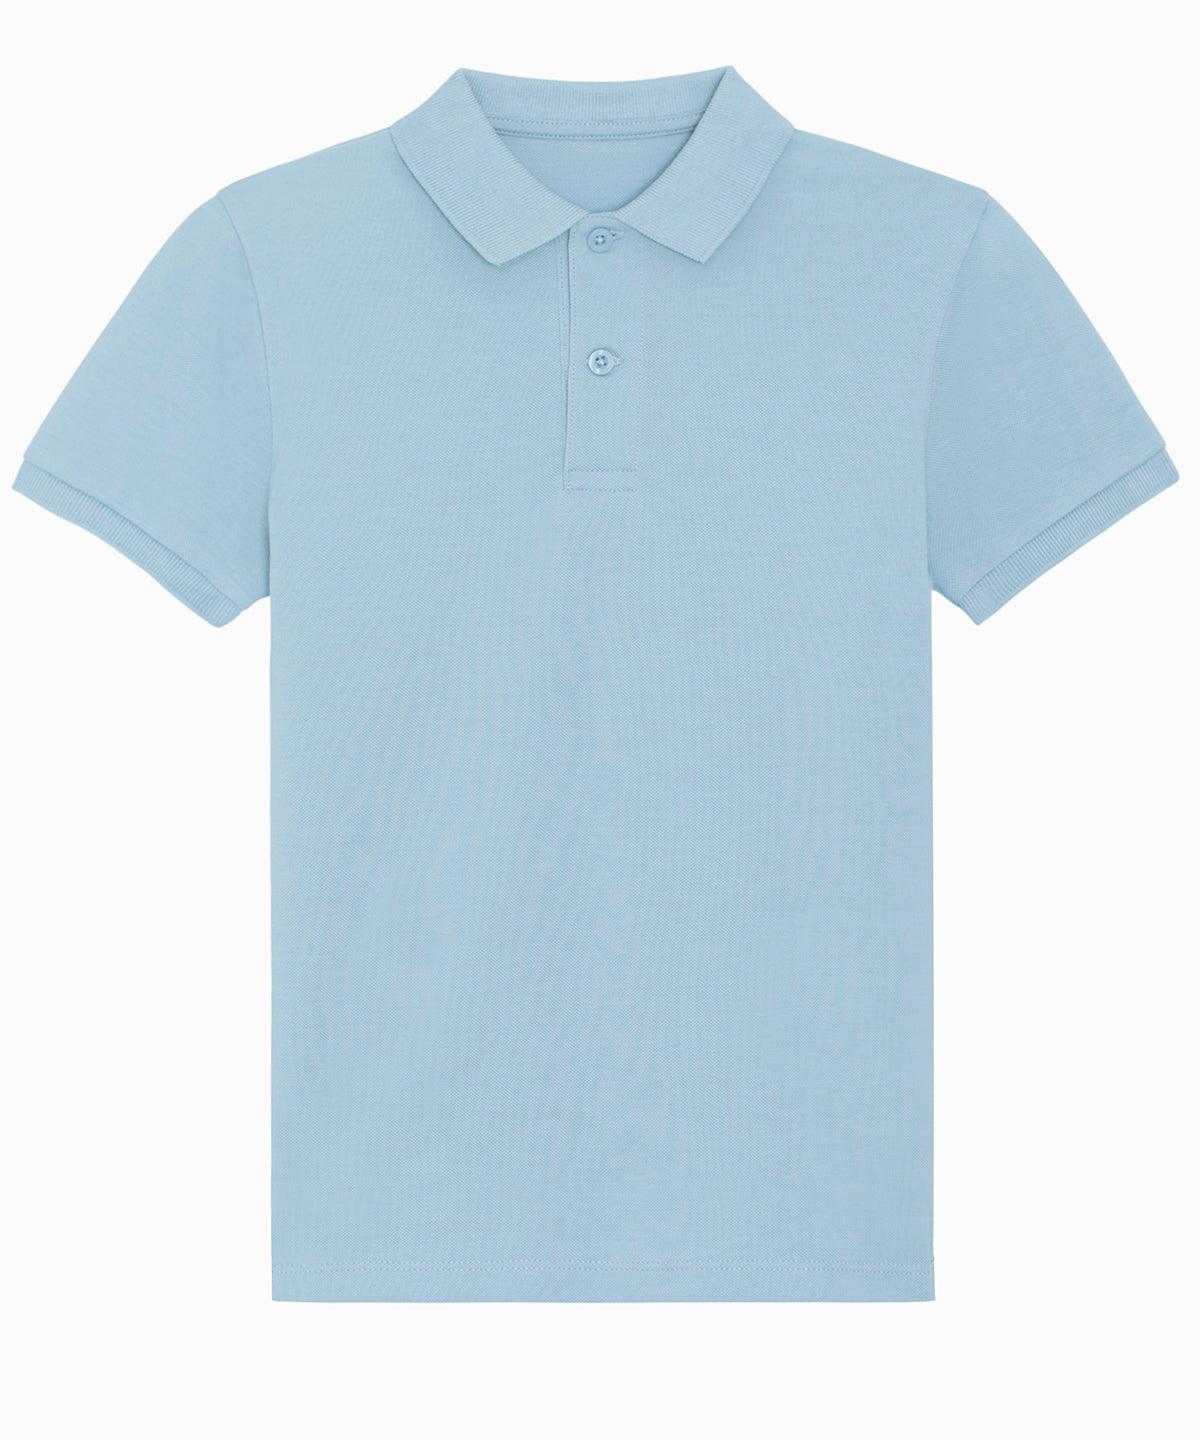 Sky Blue - Mini sprinter kids polo (STPK908) Polos Stanley/Stella Exclusives, Junior, New For 2021, New Styles, Polos & Casual, Raladeal - Stanley Stella Schoolwear Centres